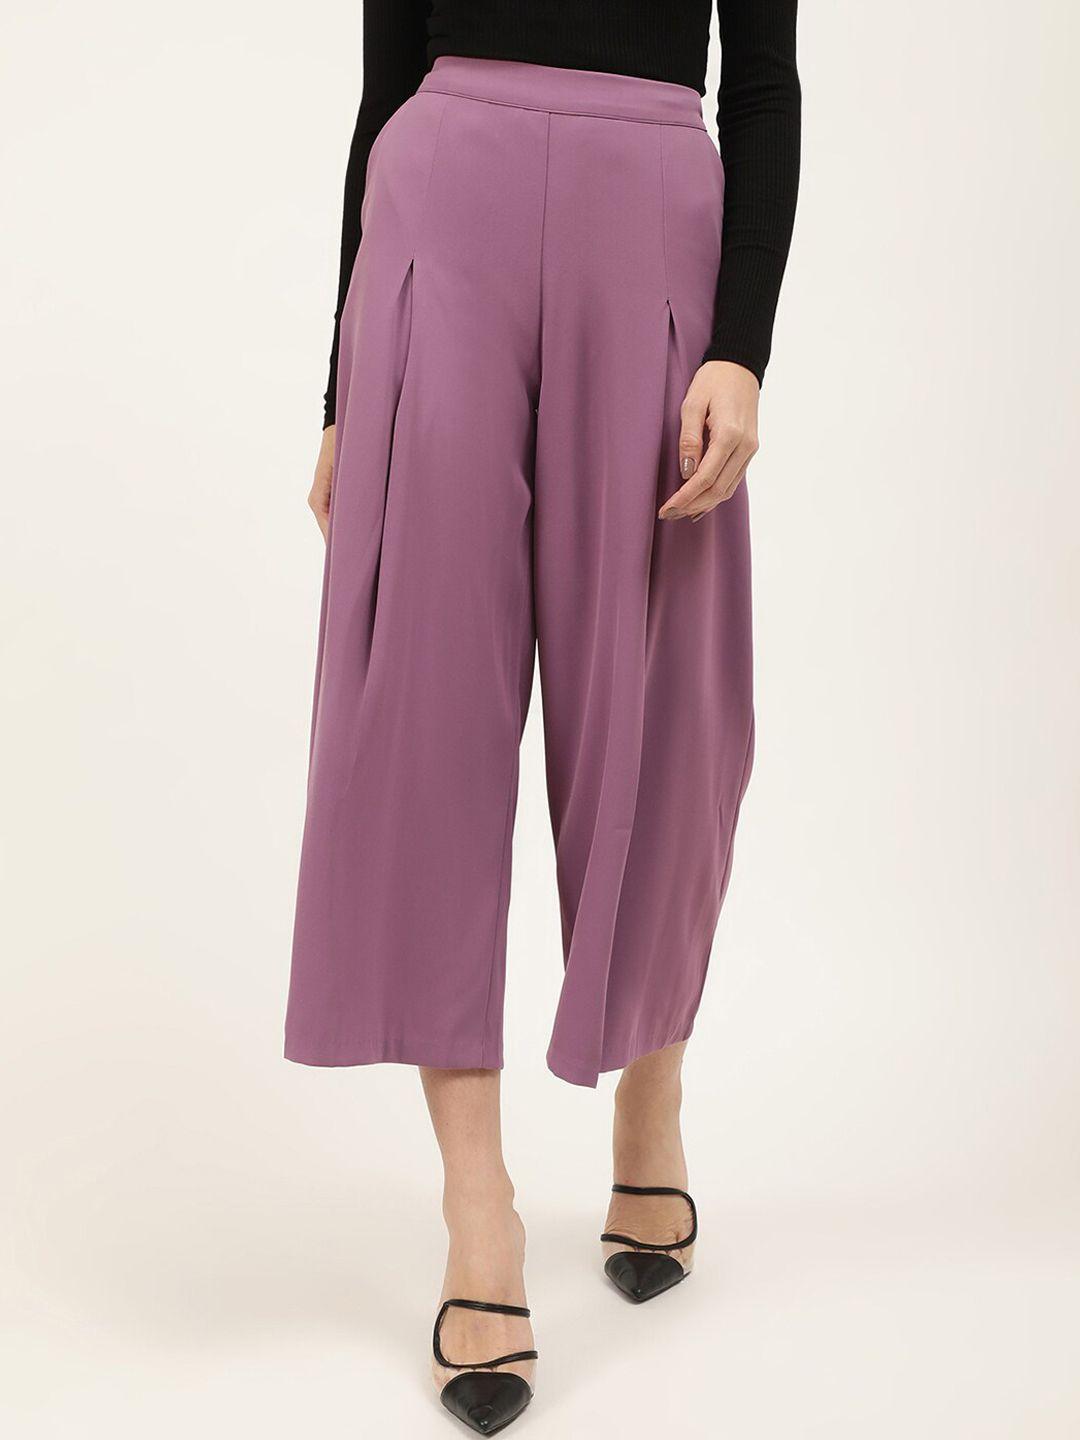 centrestage women purple loose fit high-rise culottes trousers